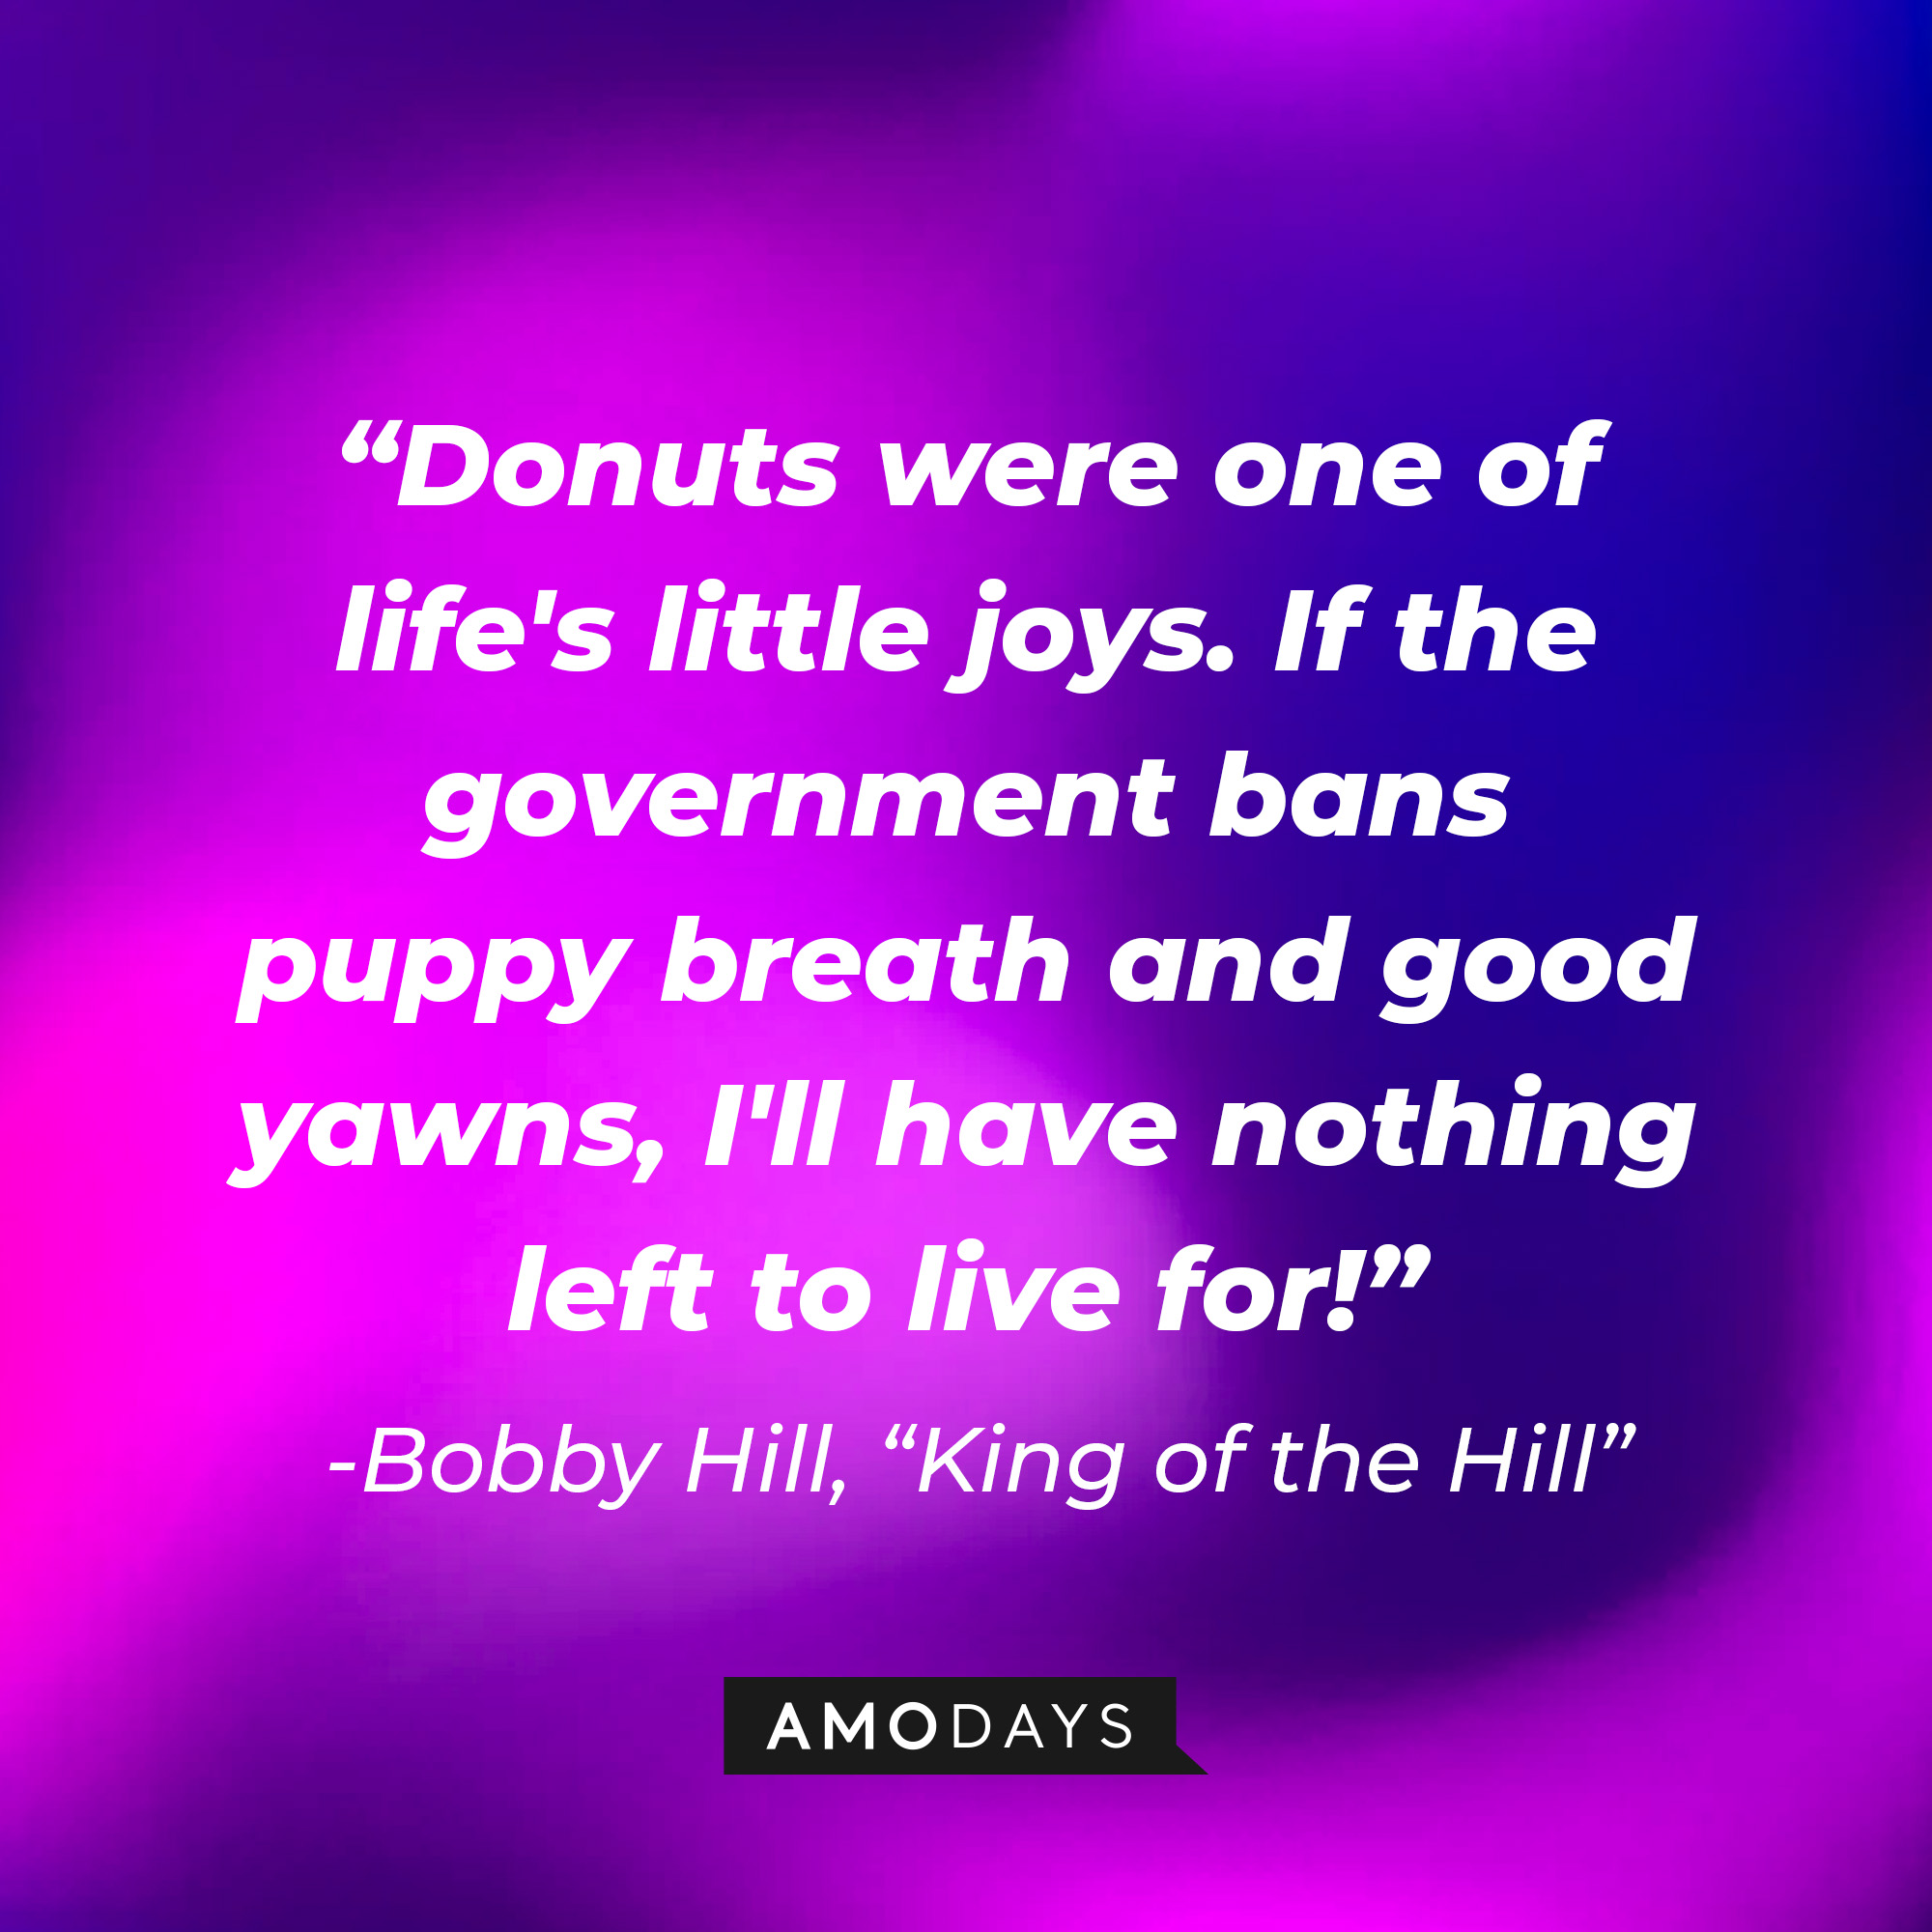 Bobby Hill with his quote, "Donuts were one of life's little joys. If the government bans puppy breath and good yawns, I'll have nothing left to live for!" | Source: facebook.com/kingofthehillfan